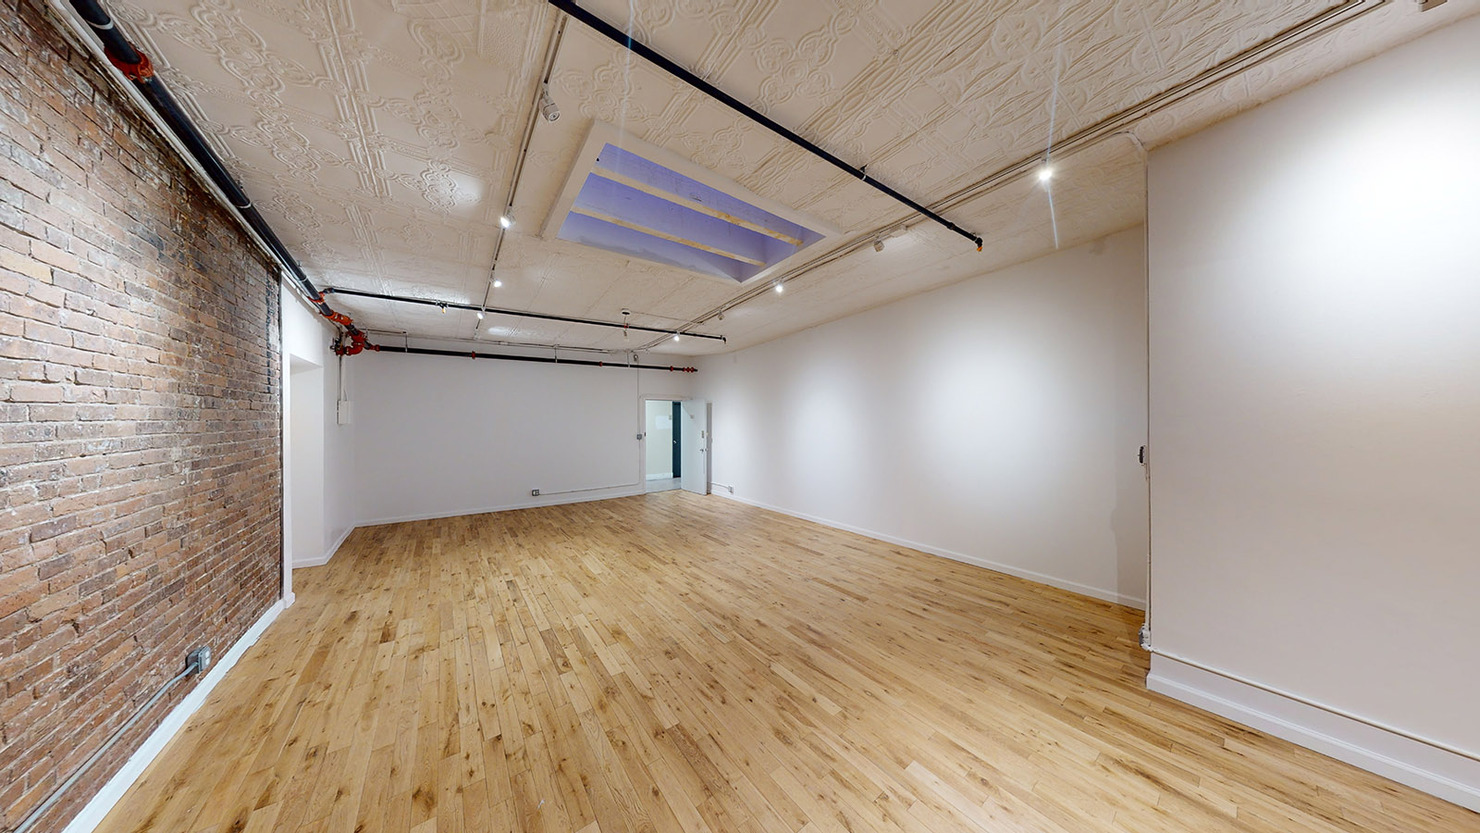 39 West 14th Street Office Space, Suite #501 - Open Area with Skylight